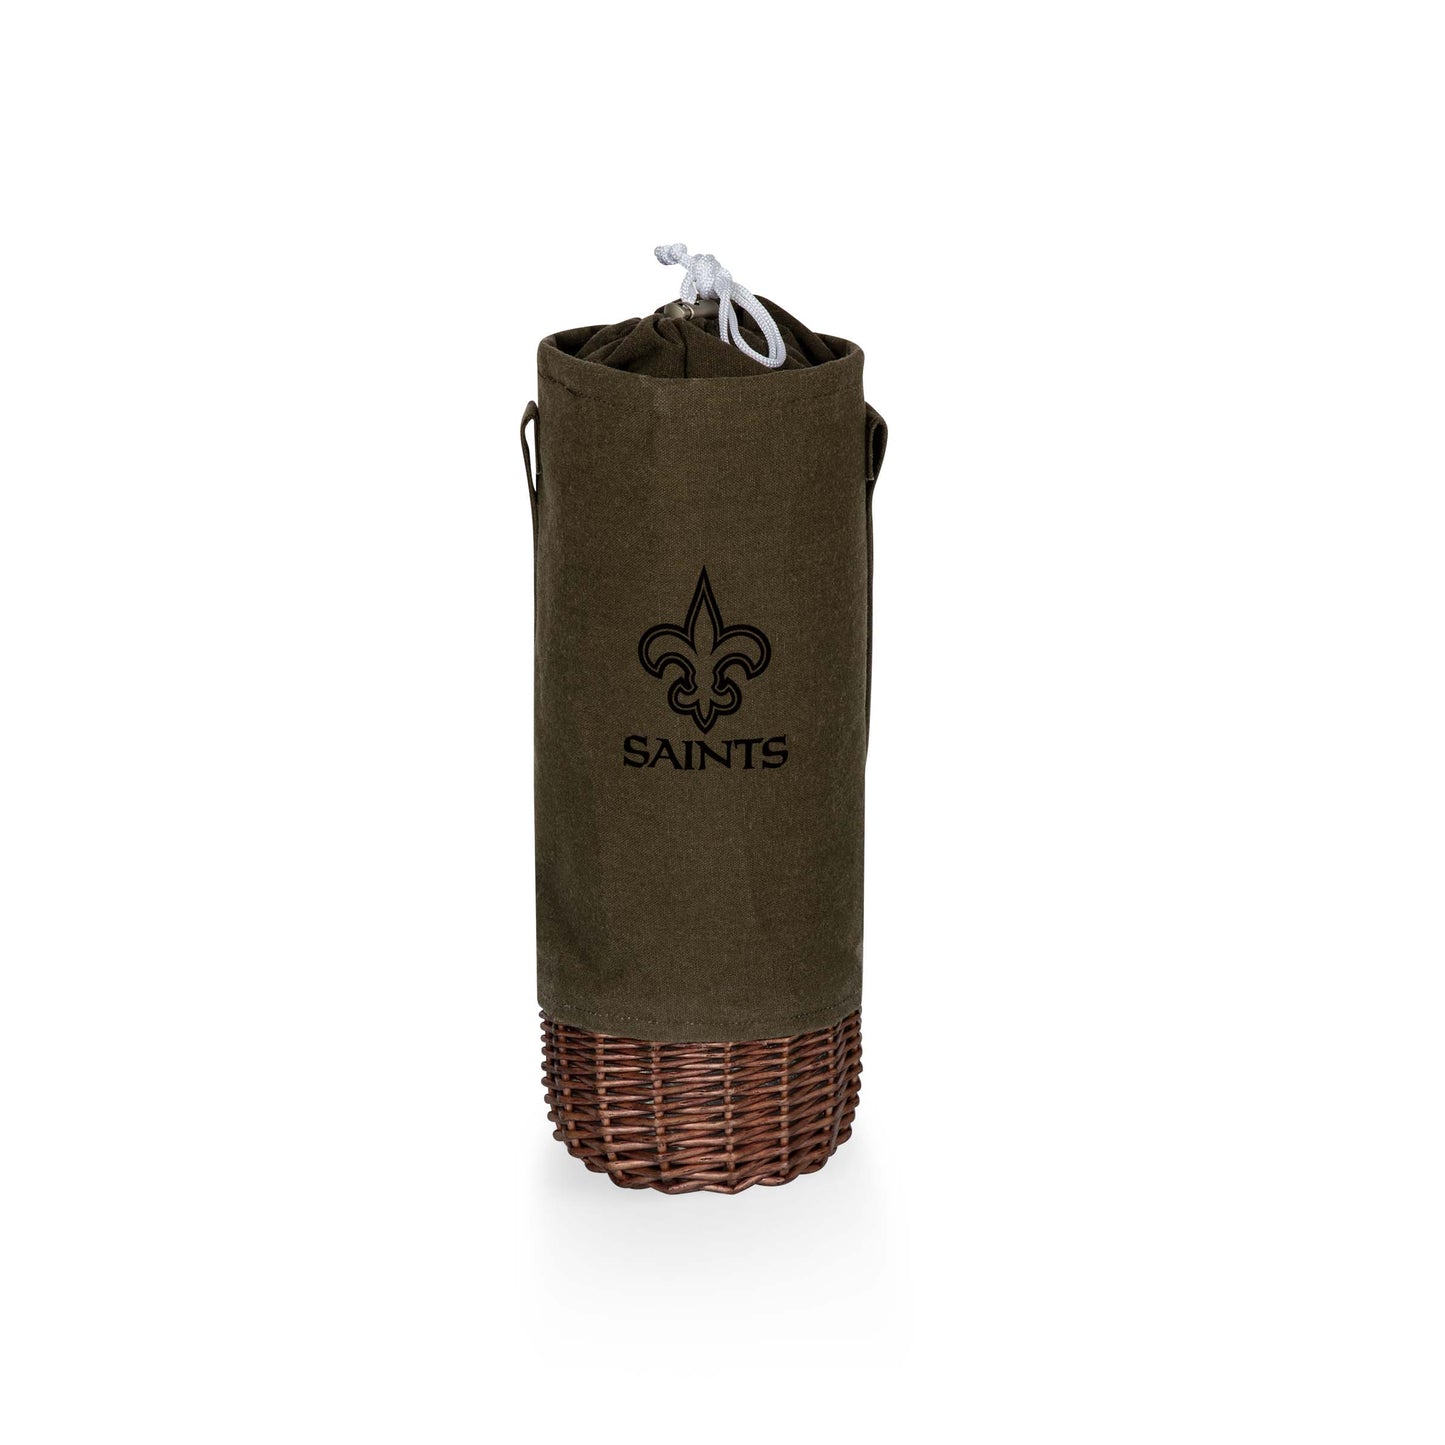 New Orleans Saints - Malbec Insulated Canvas and Willow Wine Bottle Basket